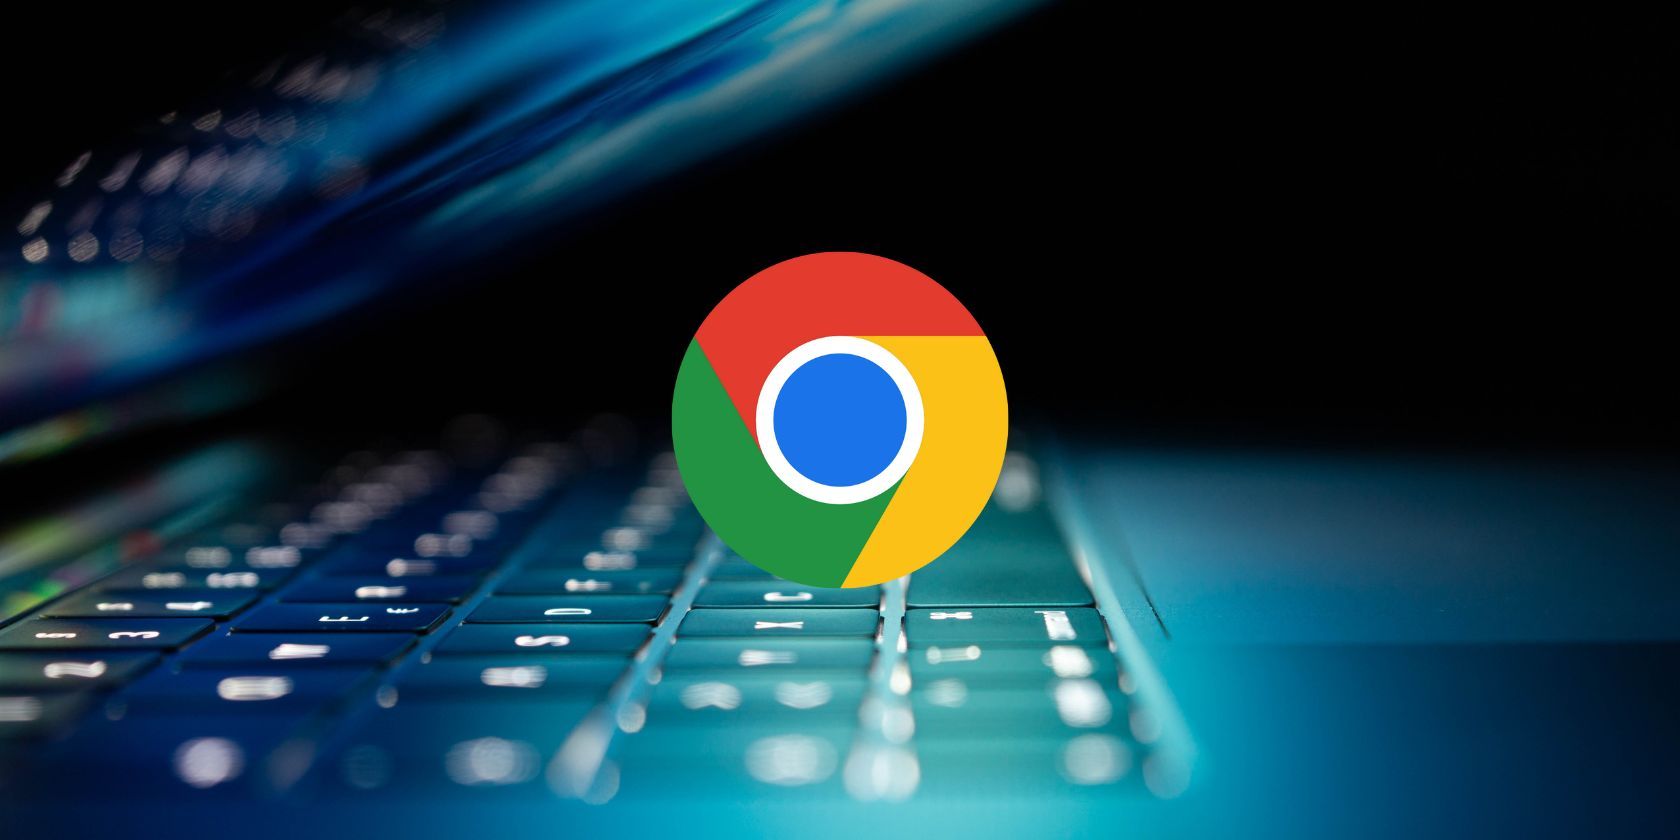 The Google Chrome icon in front of an of a partially closed laptop